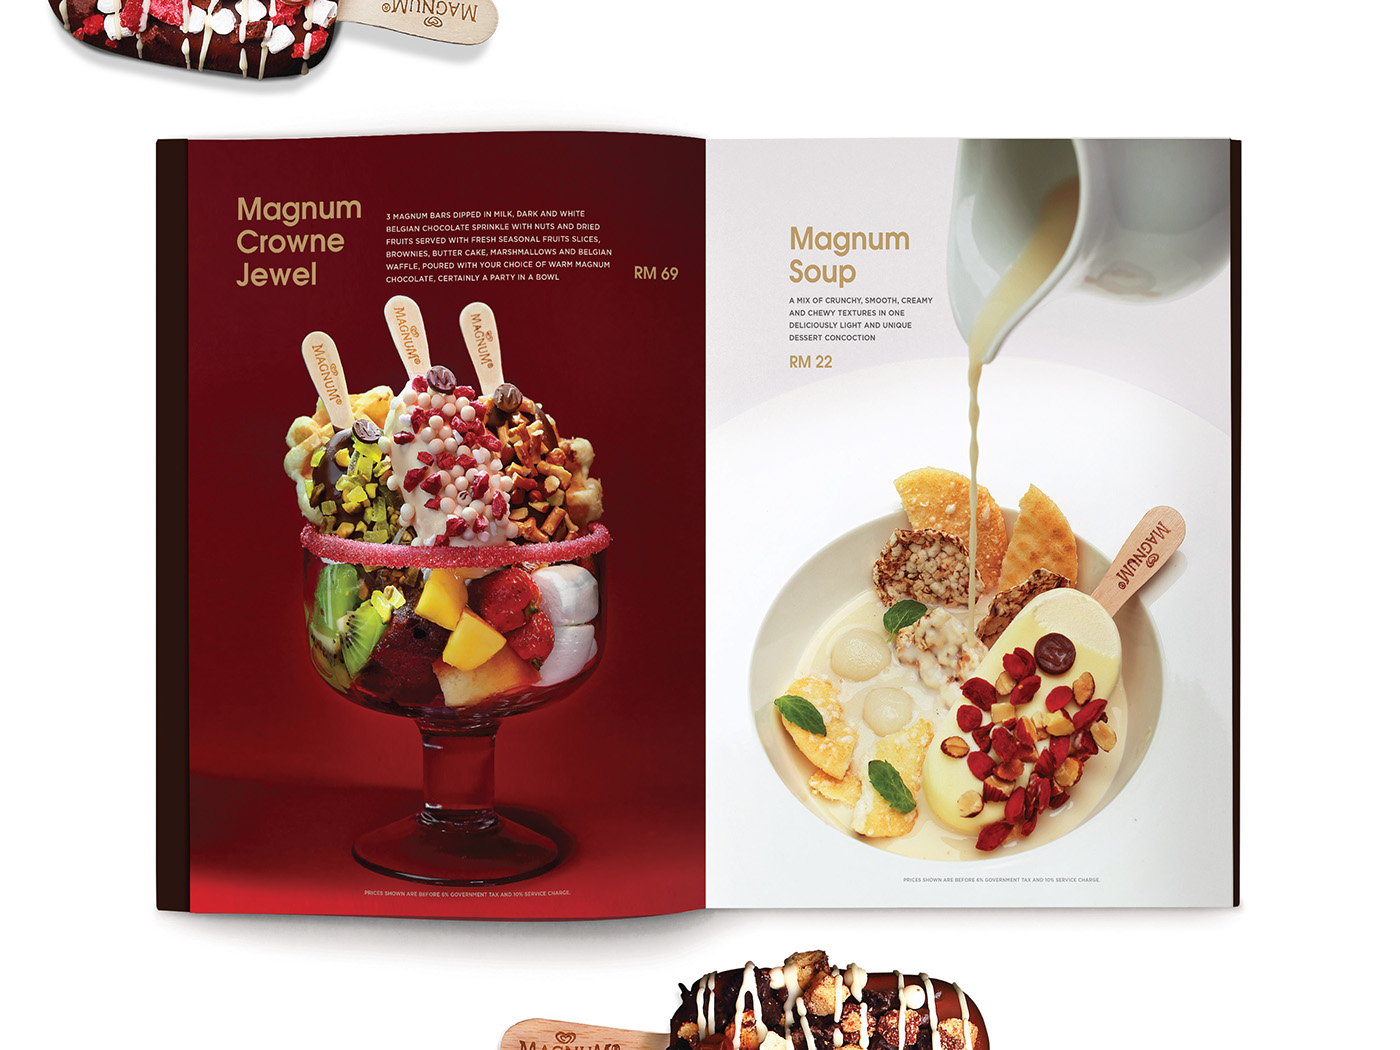 Magnum Pleasure Store menu design inner page layout design with beautiful food styling and photography of Magnum Crowne Jewel and Magnum Soup.